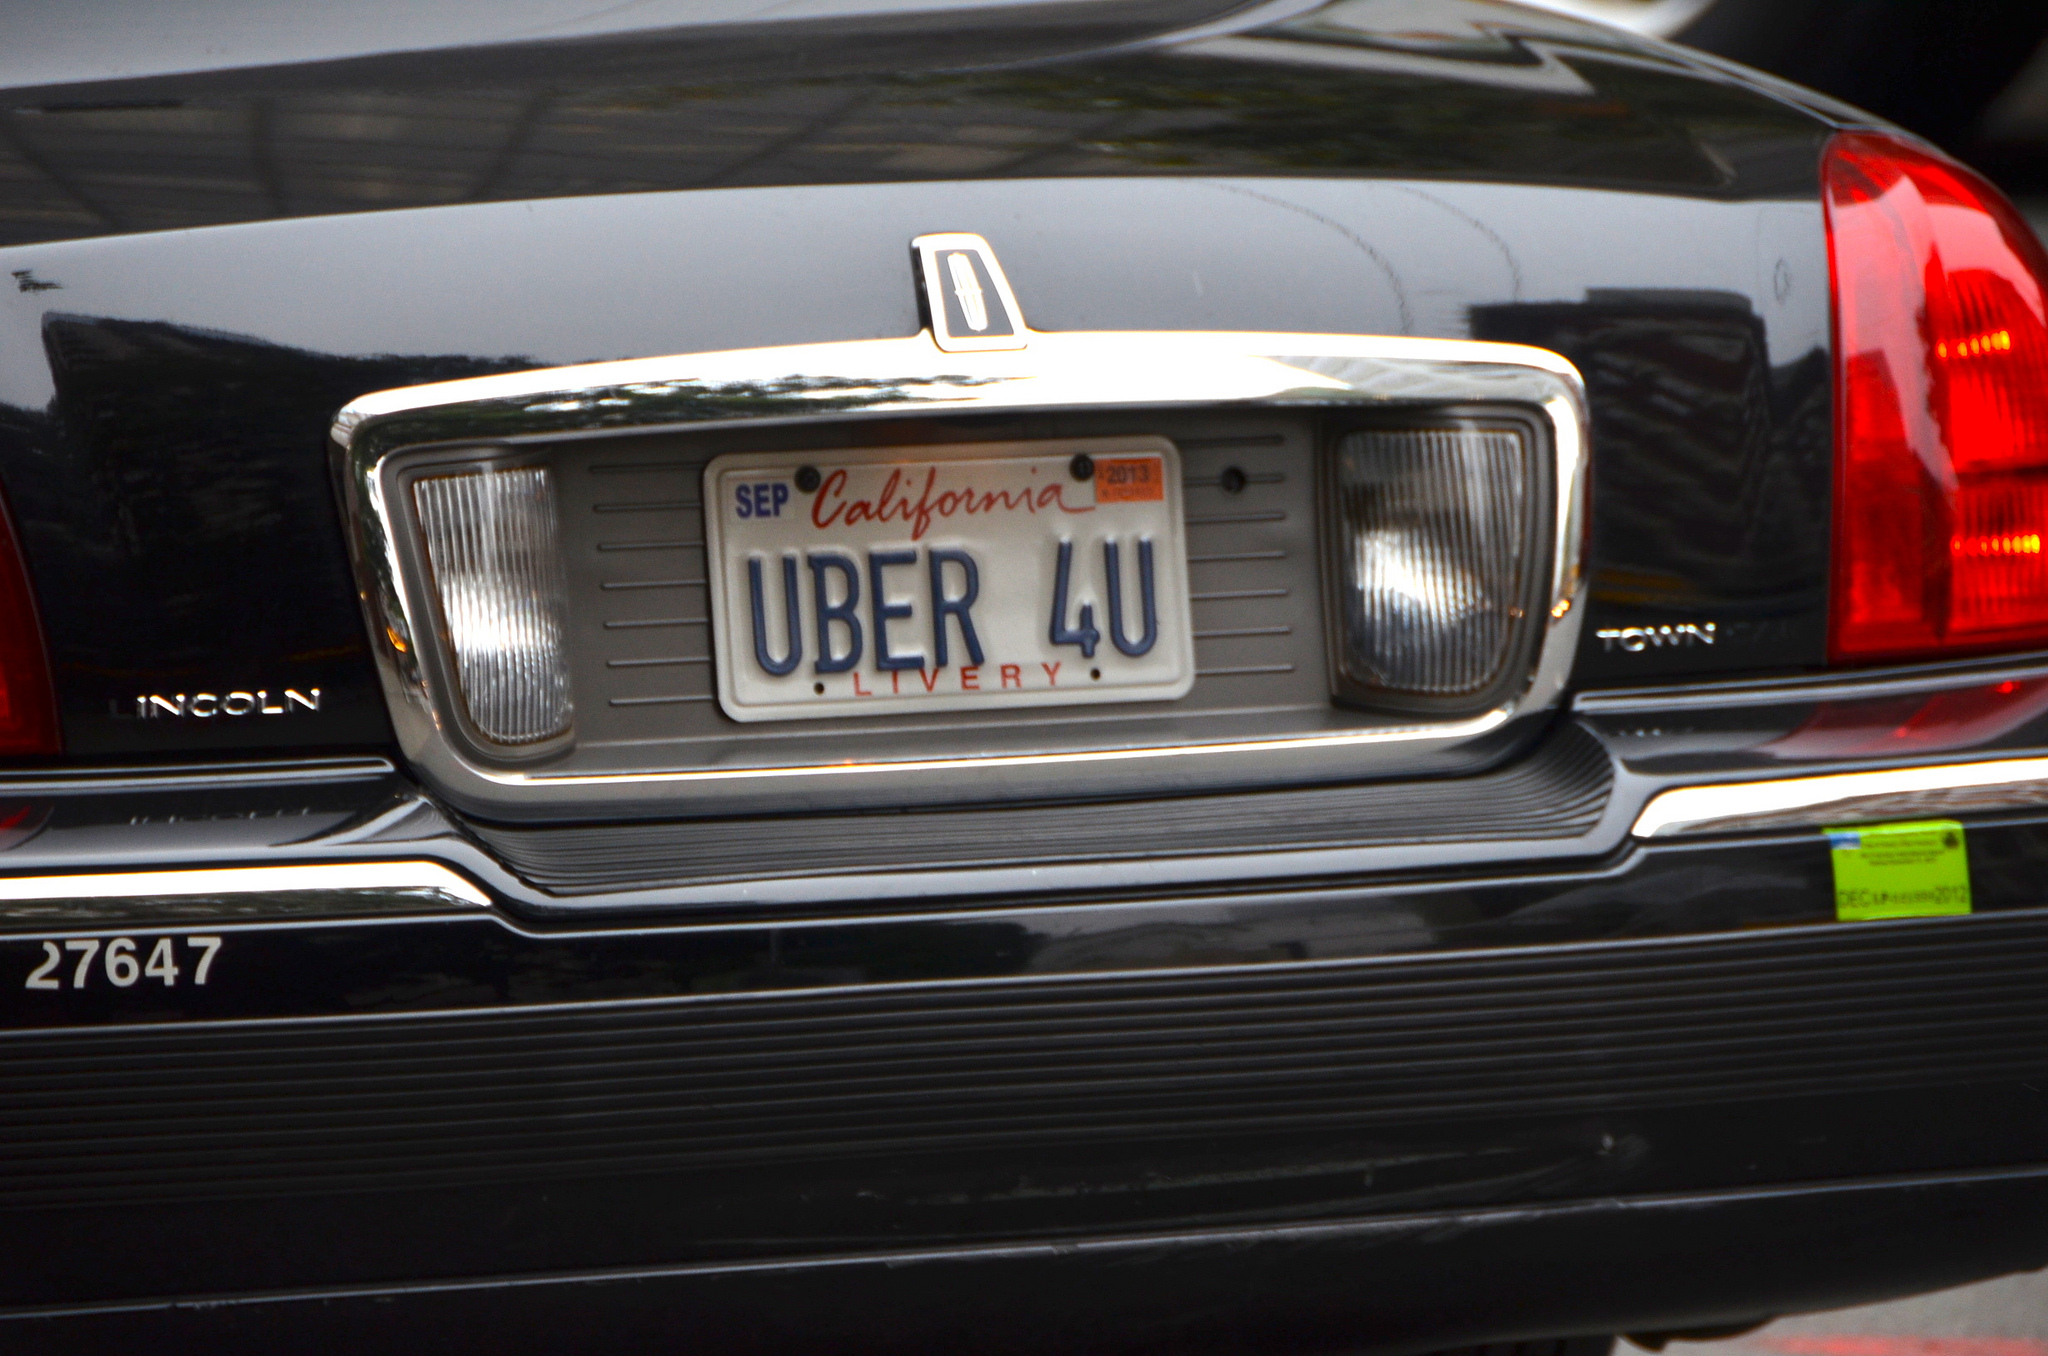 California Penalizes Uber $7.3 Million, Says Service Should Be Suspended